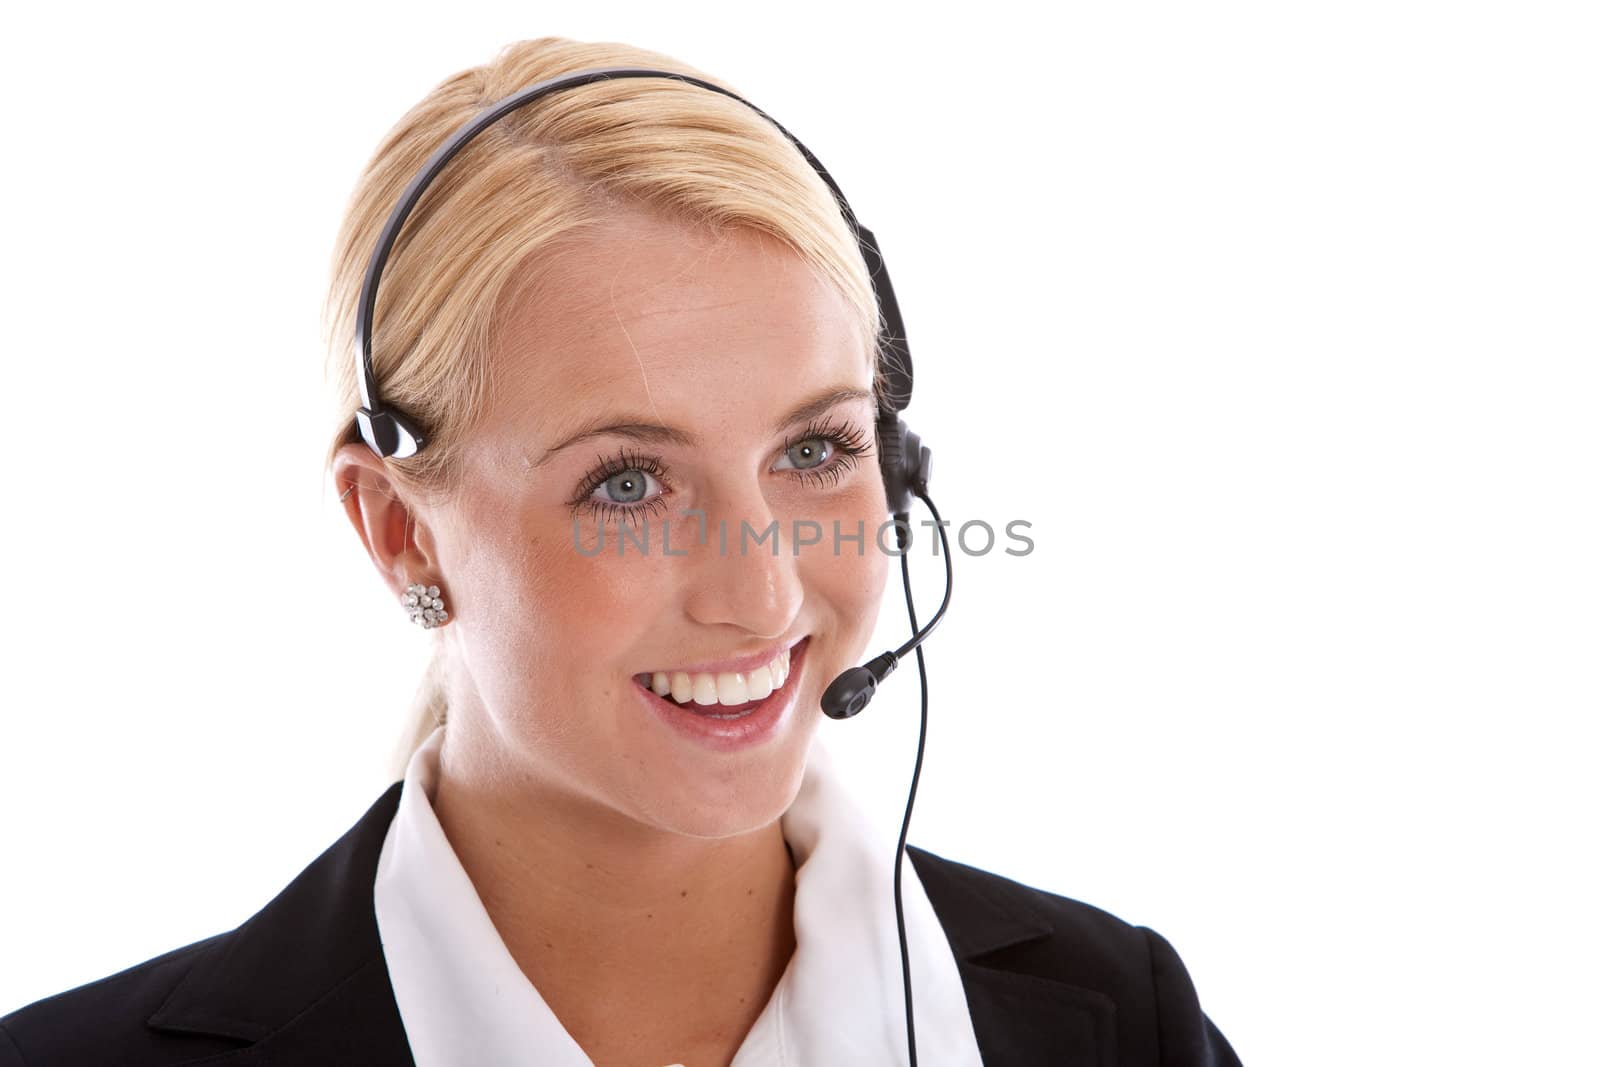 Attractive young woman with receptionist headset and a radiant smile